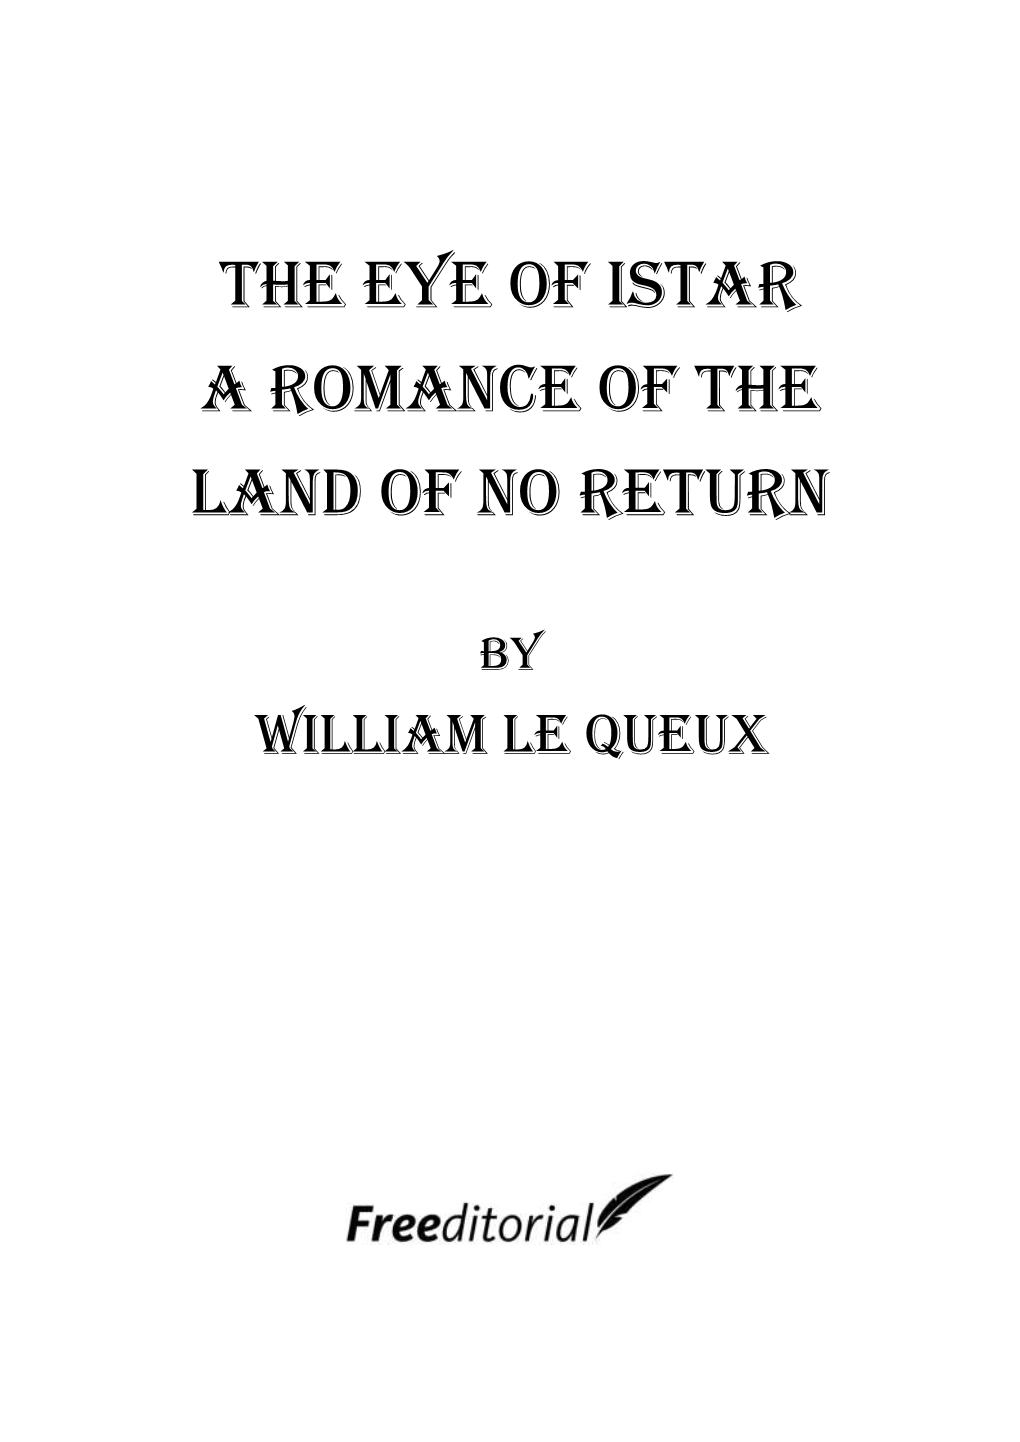 The Eye of Istar a Romance of the Land of No Return